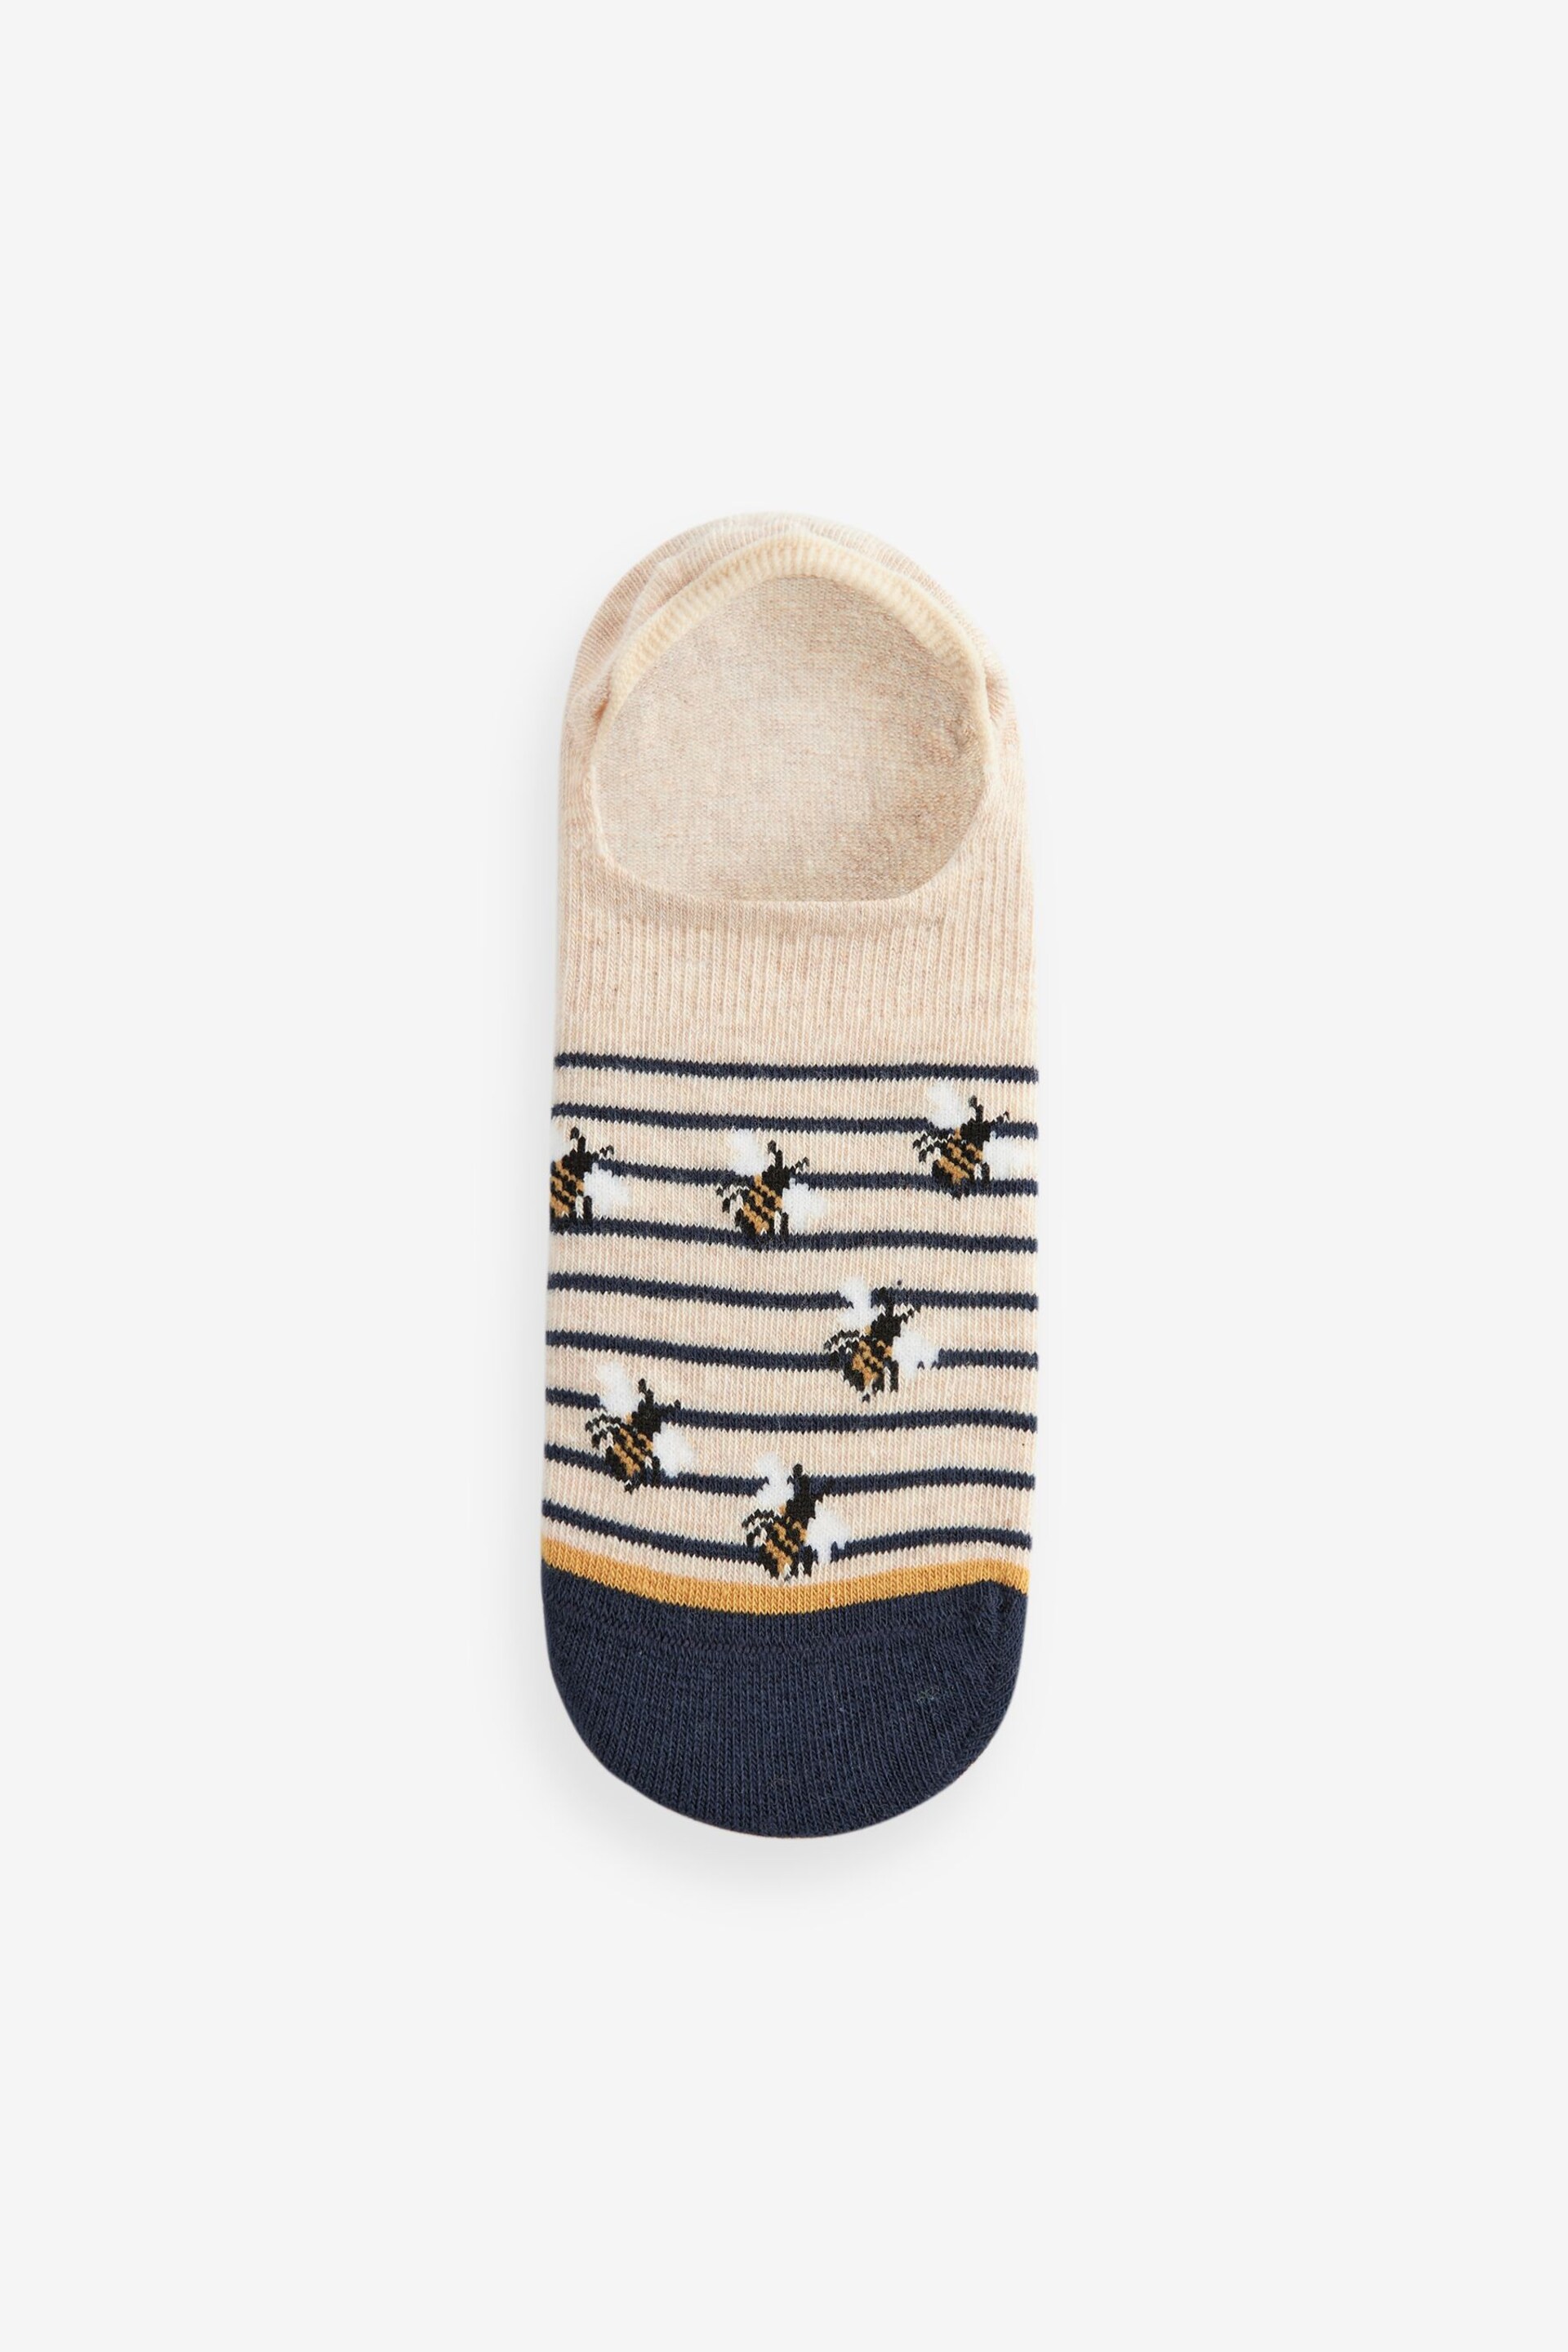 Navy/Ochre Bee Invisible Socks 5 Pack - Image 2 of 6